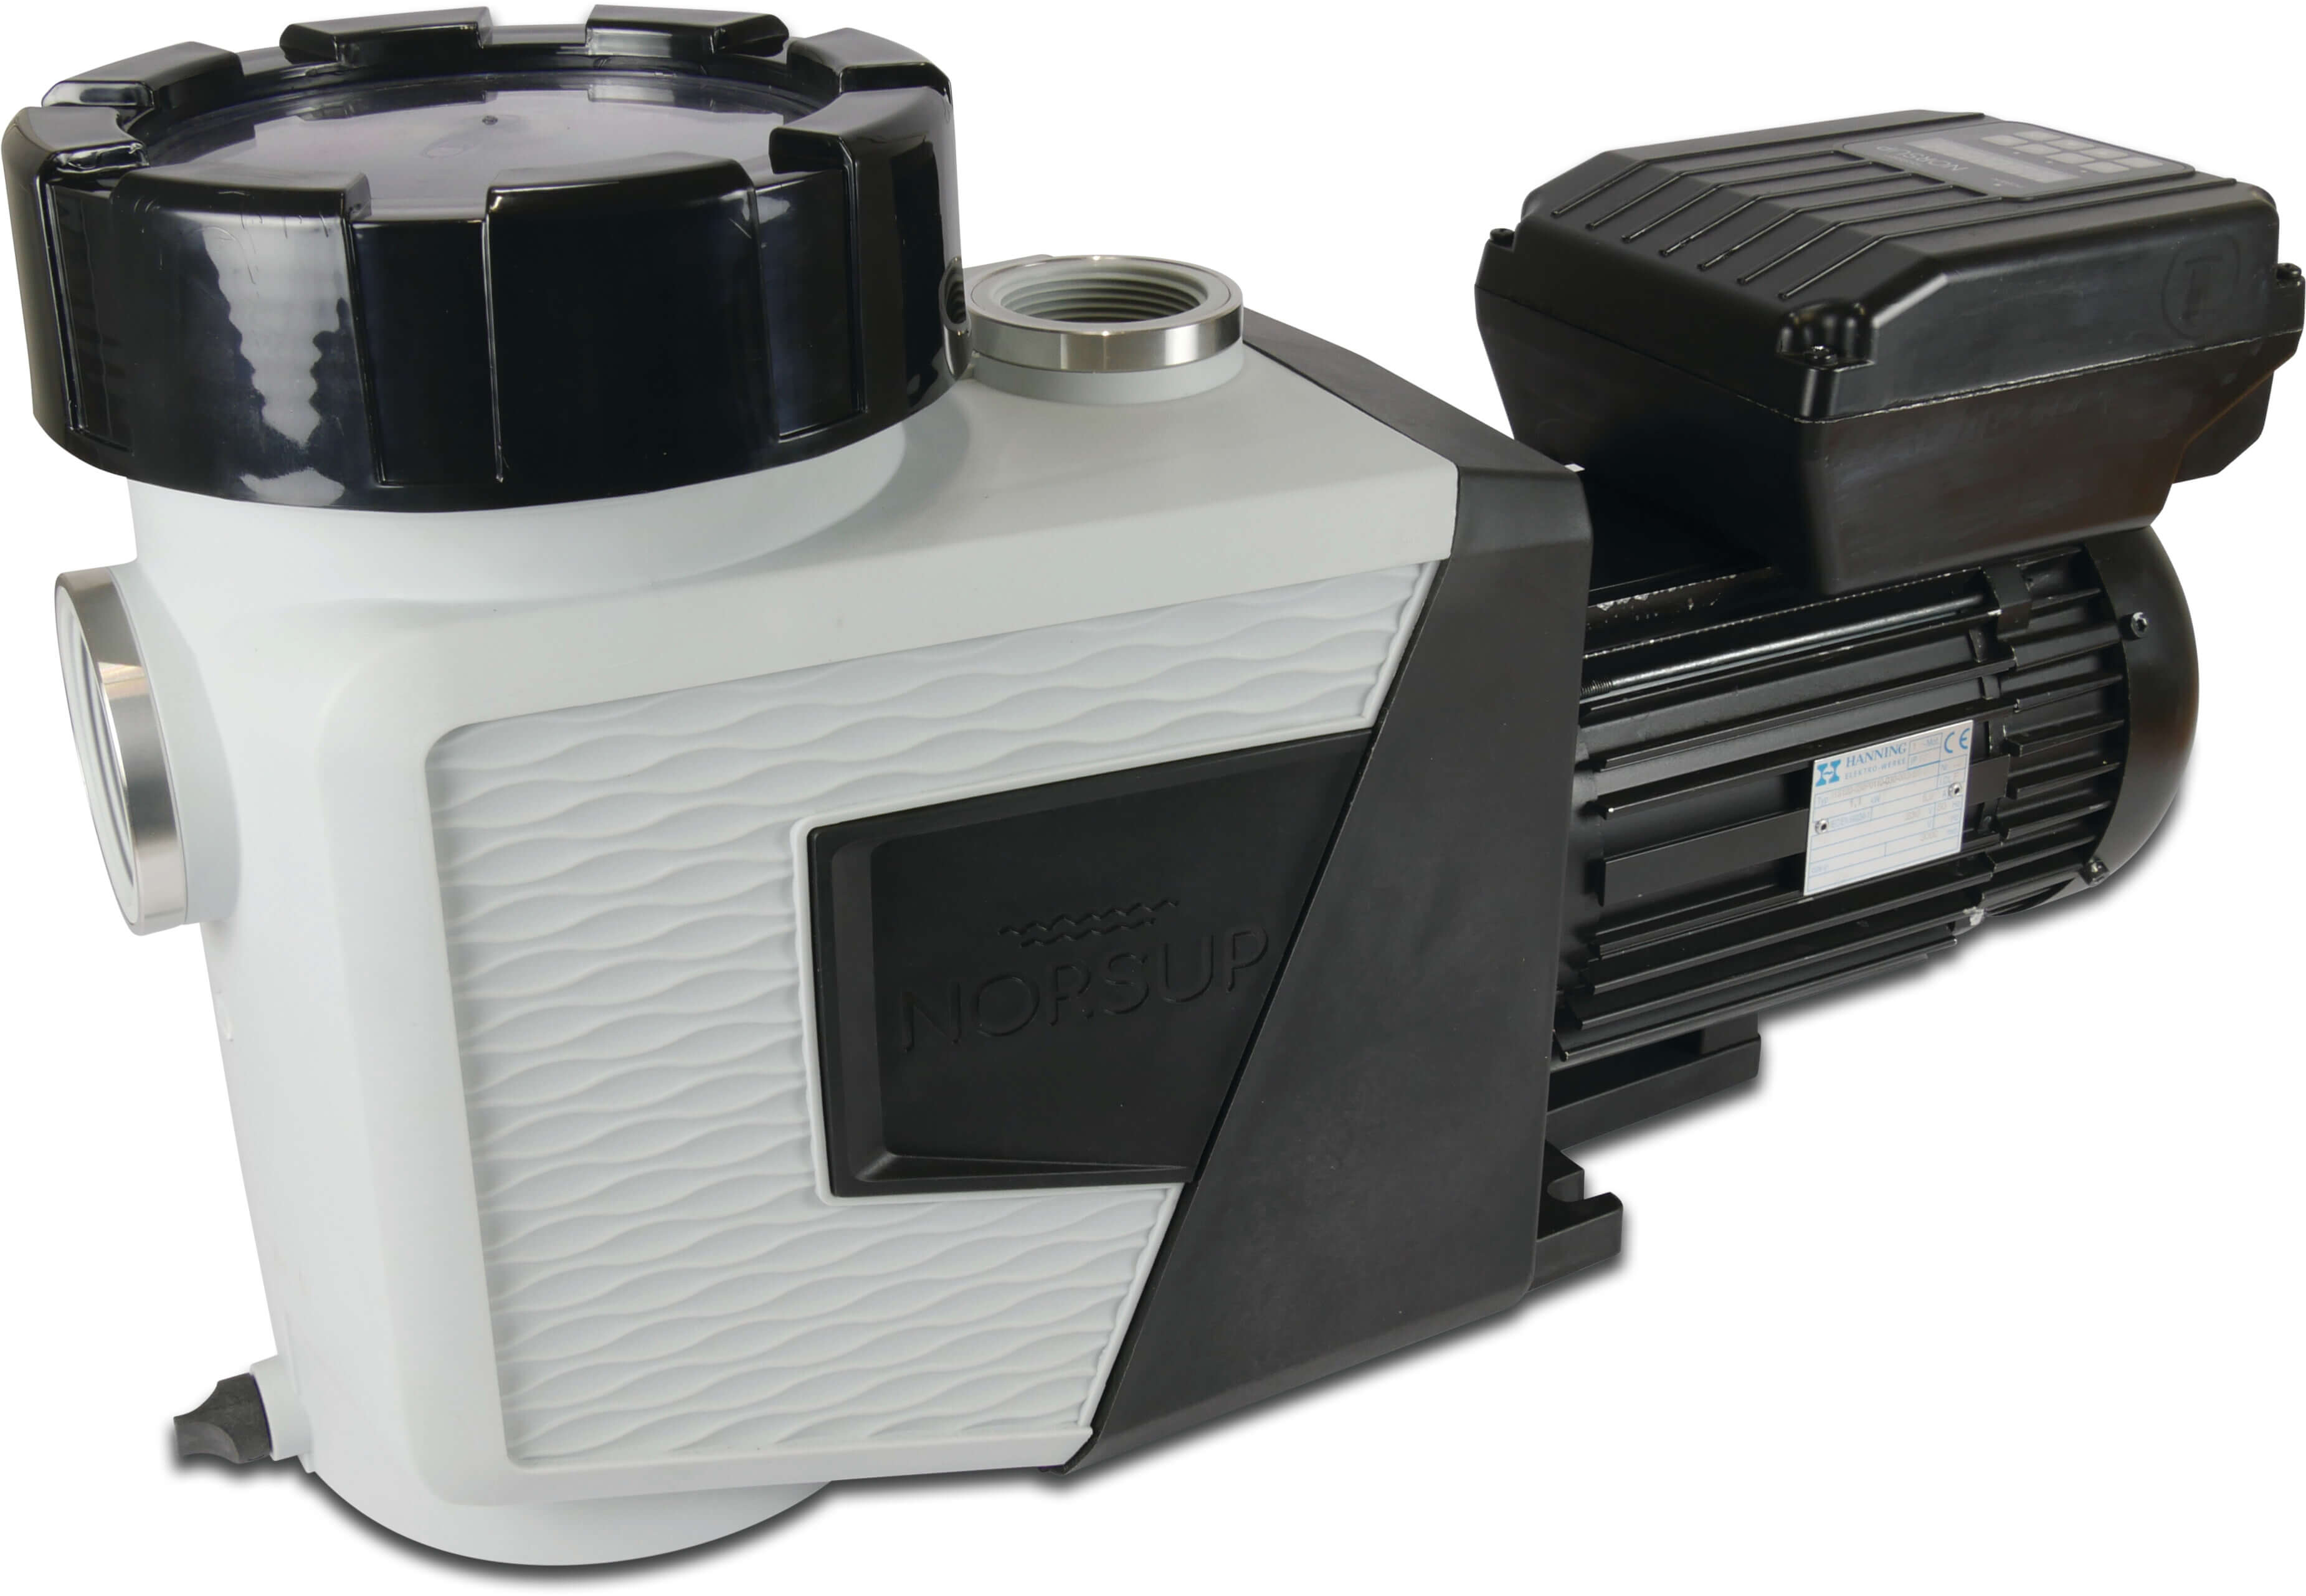 Norsup Variable speed pool pump 2" x 1 1/2" Innengewinde 230VAC type Evo Pro with Modbus 1,5PS